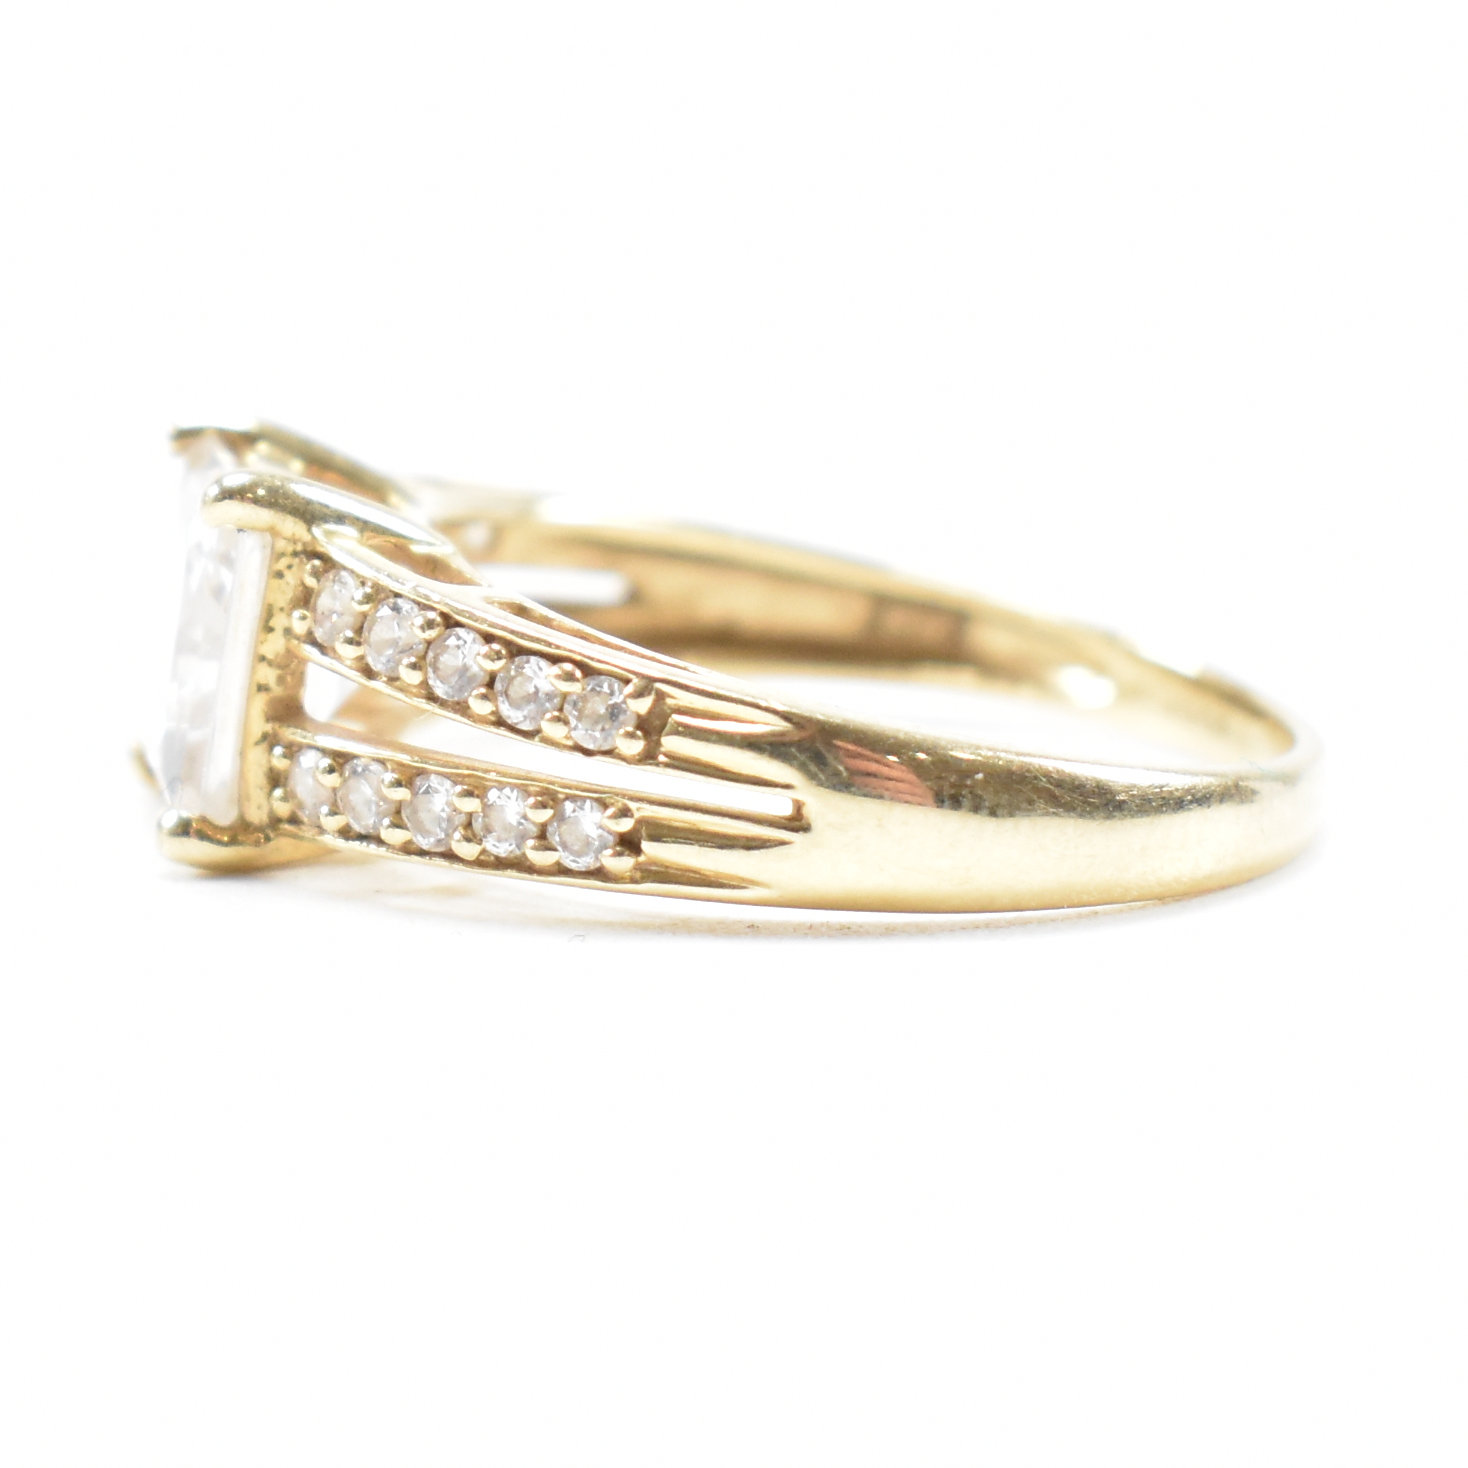 HALLMARKED 14CT GOLD & CUBIC ZIRCONIA RING - Image 3 of 9